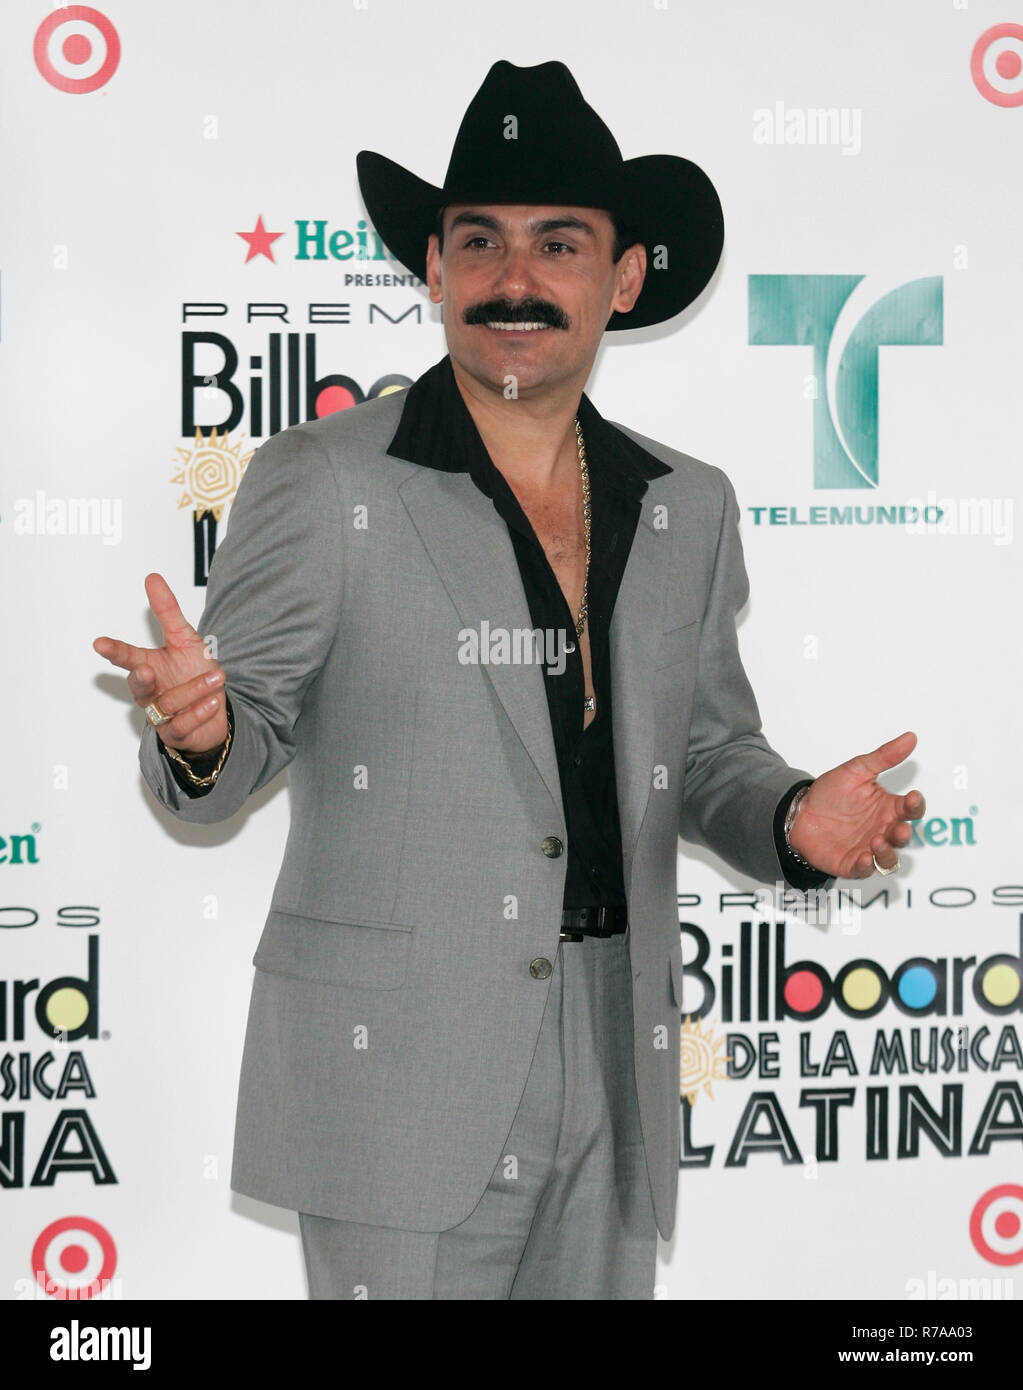 El Chapo de Sinaloa appears backstage at the 2007 Latin Billboard Awards at the BankUnited Center in Coral Gables, Florida on April 26, 2007. Stock Photo